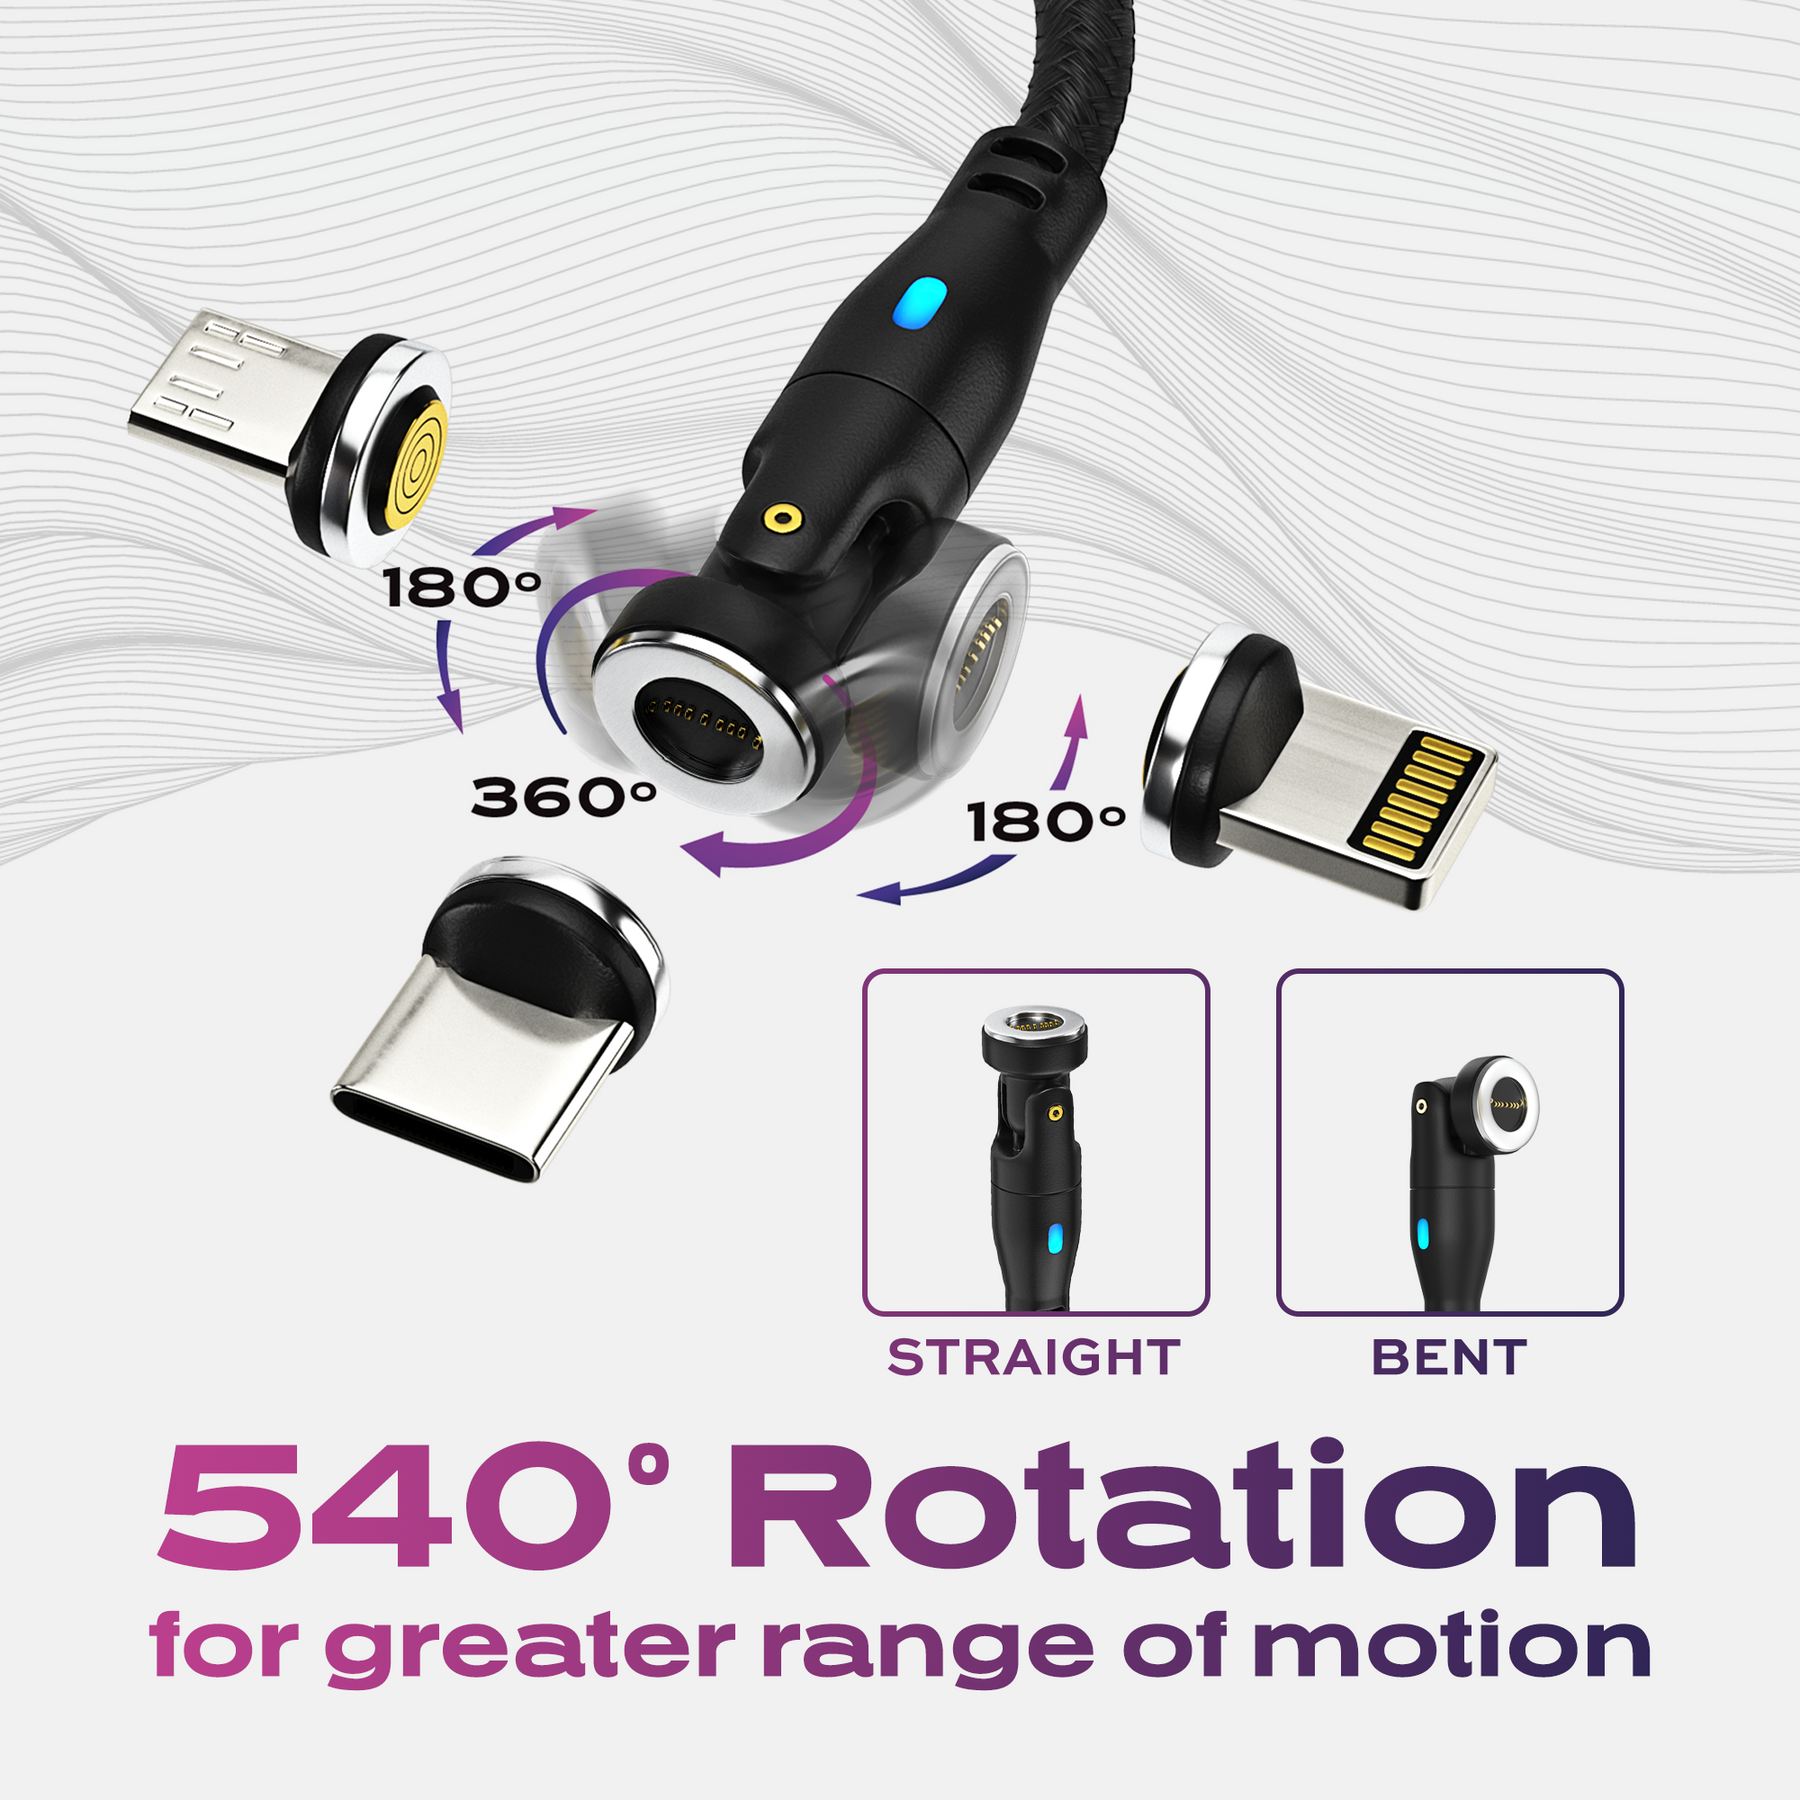 Statik 360 - Magnetic Charging Cable - 360° Rotating Phone Charger w 3  Removable Magnetic Connectors Compatible 